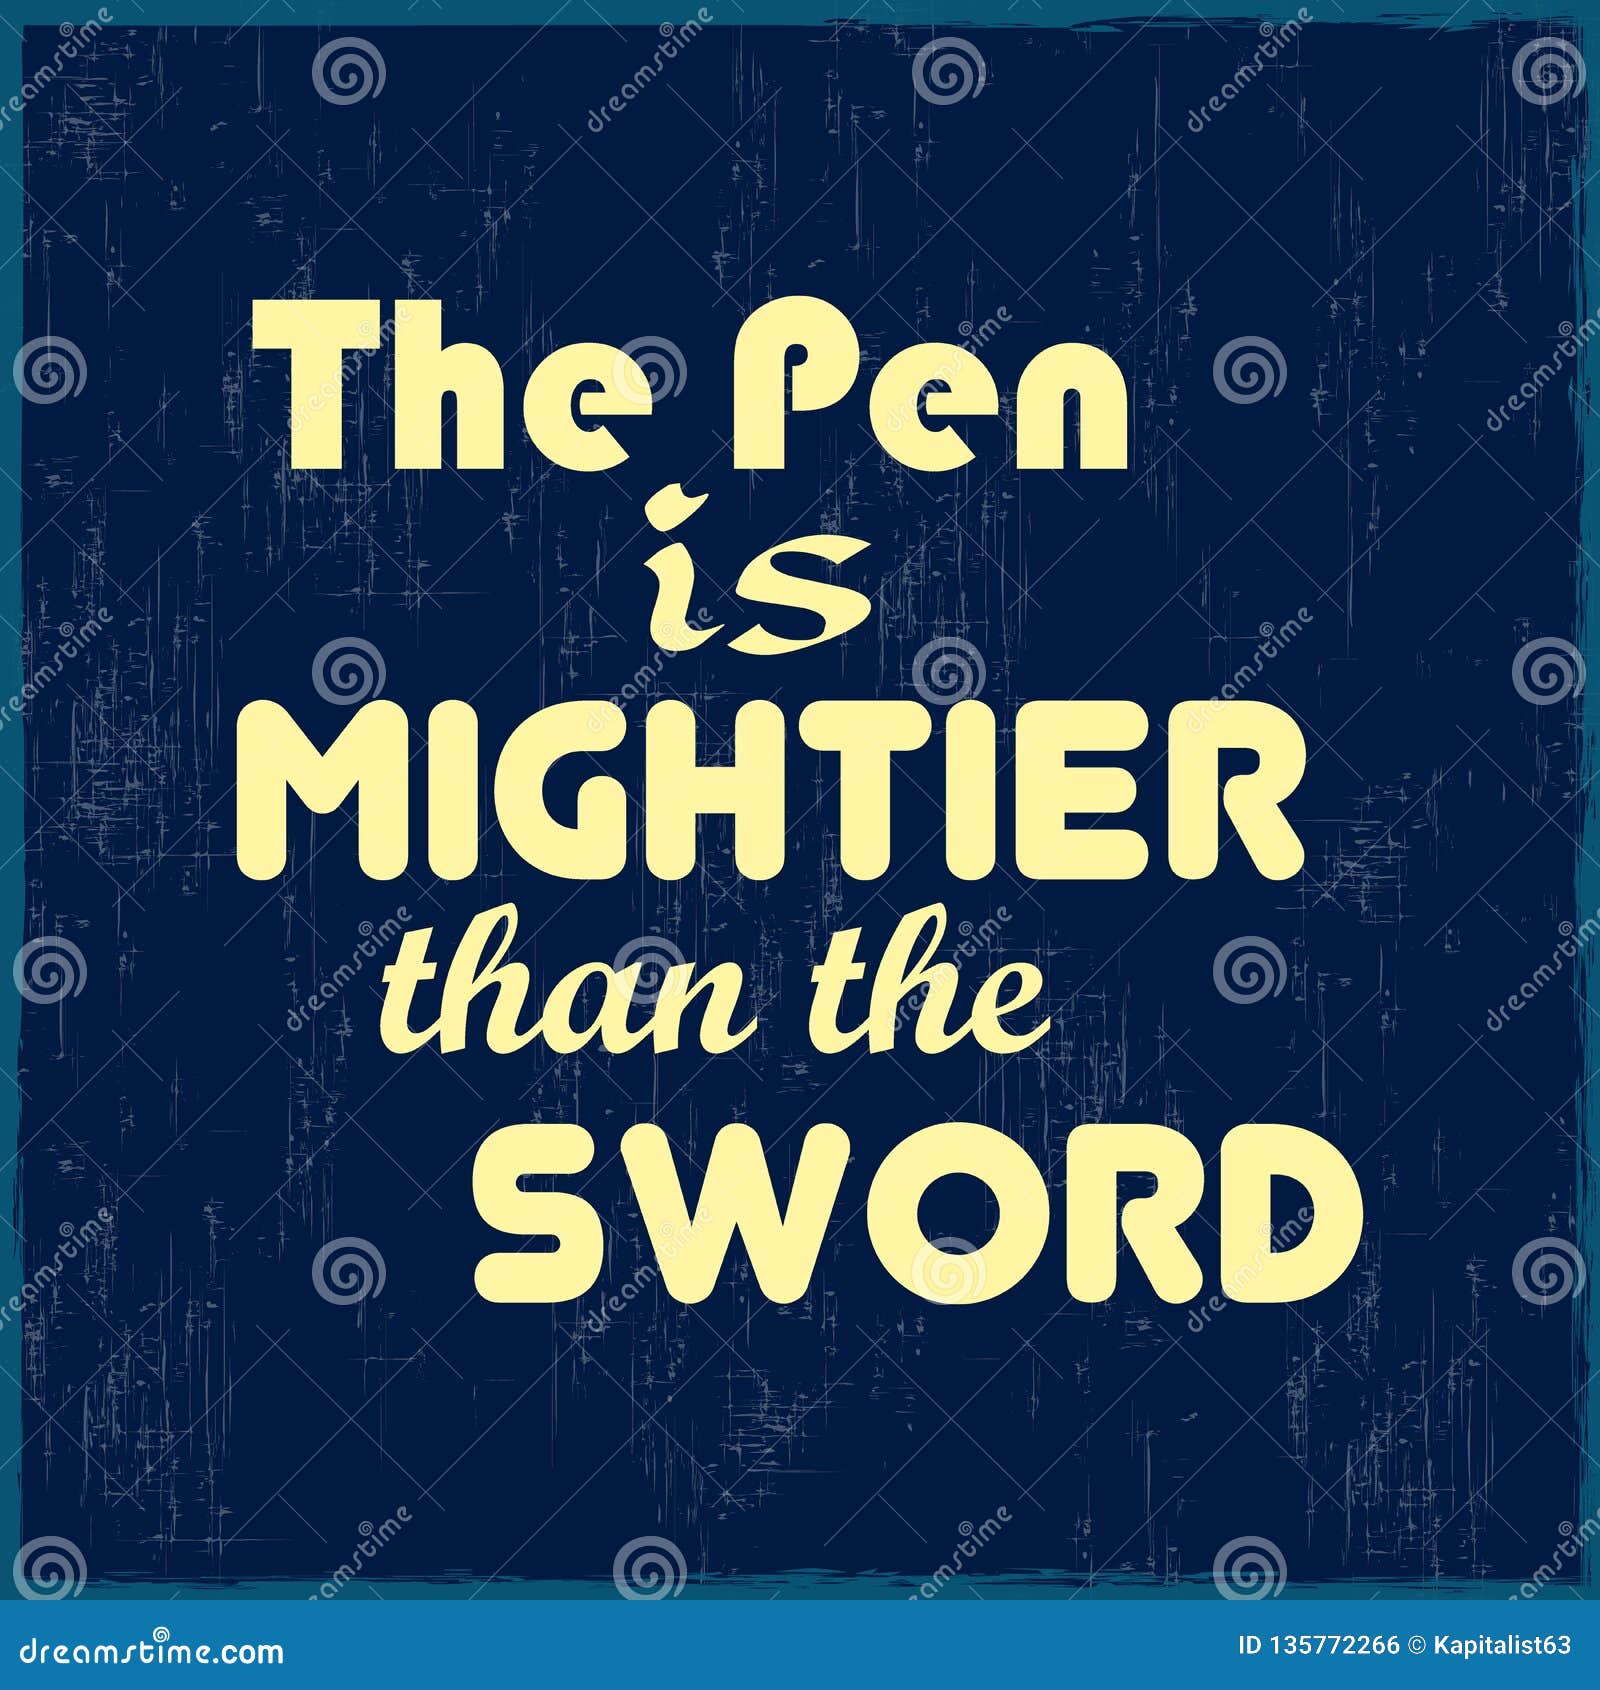 pen is mightier than sword meaning